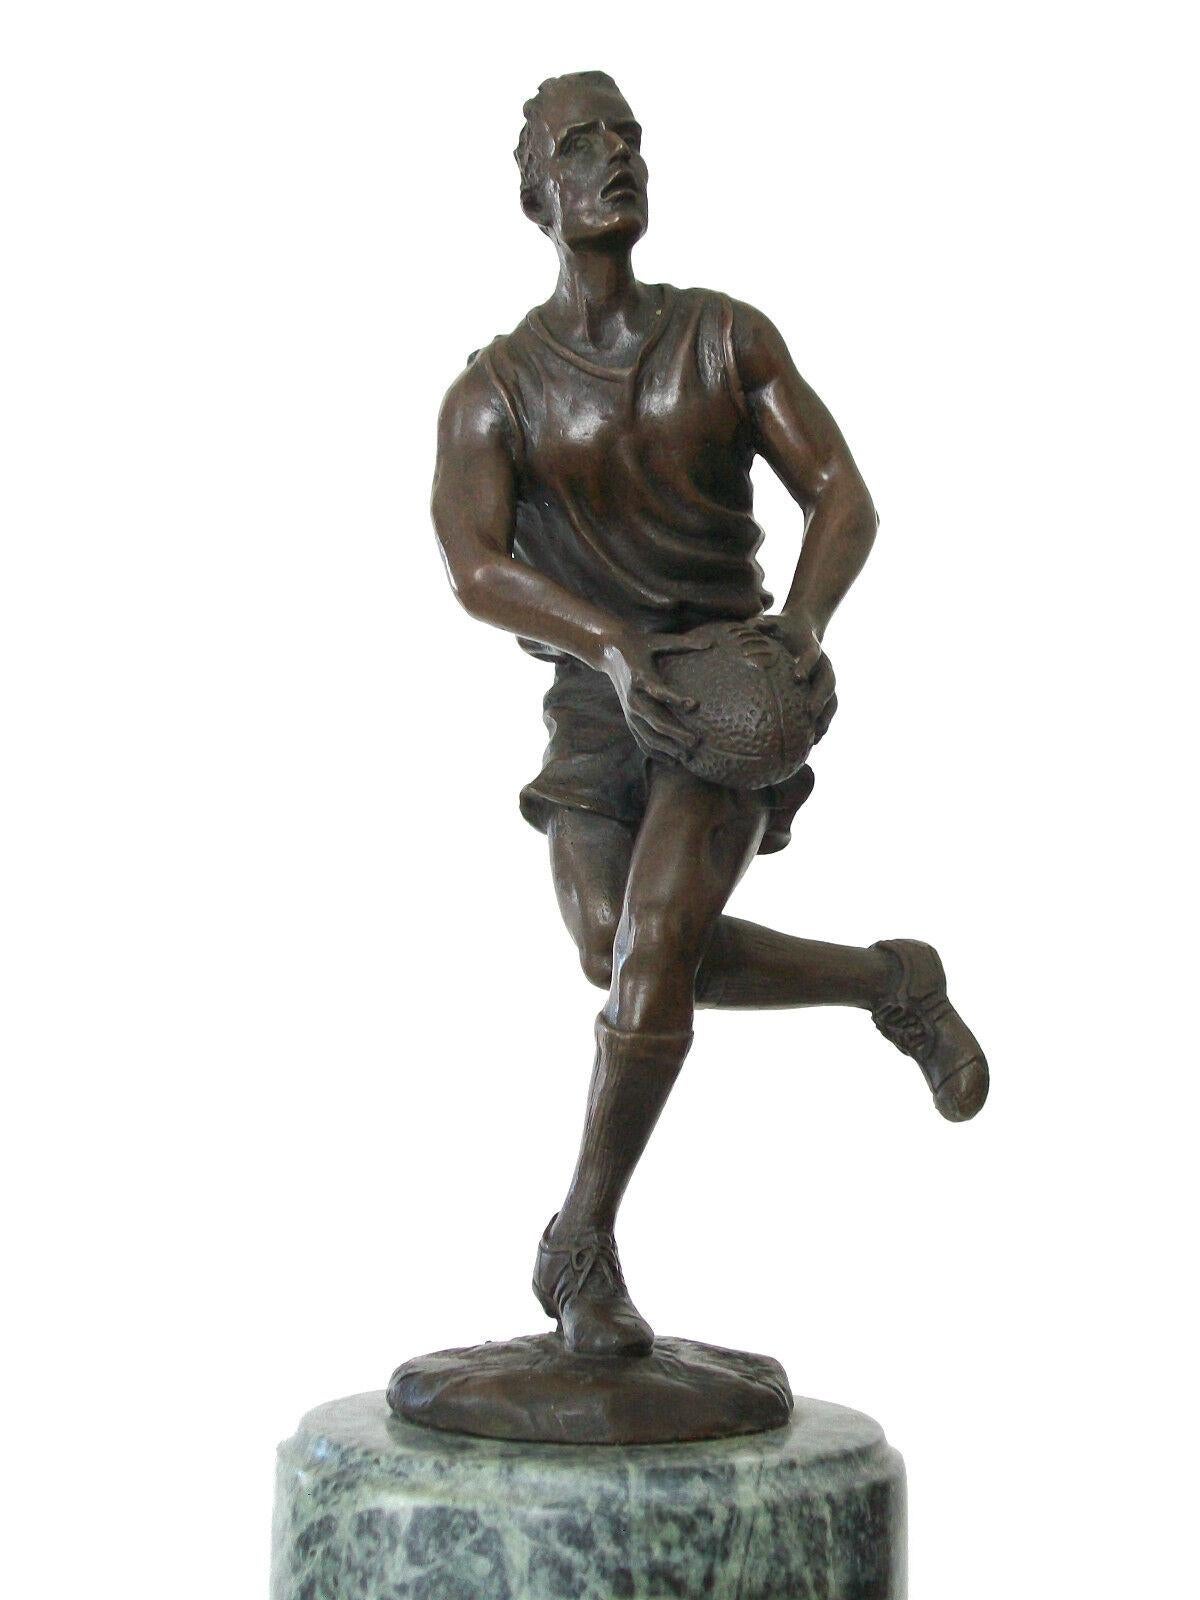 MIGUEL FERNANDO LOPEZ (MILO) - Vintage rugby player bronze sculpture on marble base - signed - Portugal - late 20th century.

Good vintage condition - no loss - no damage - no restoration - minor surface scratches with signs of age and